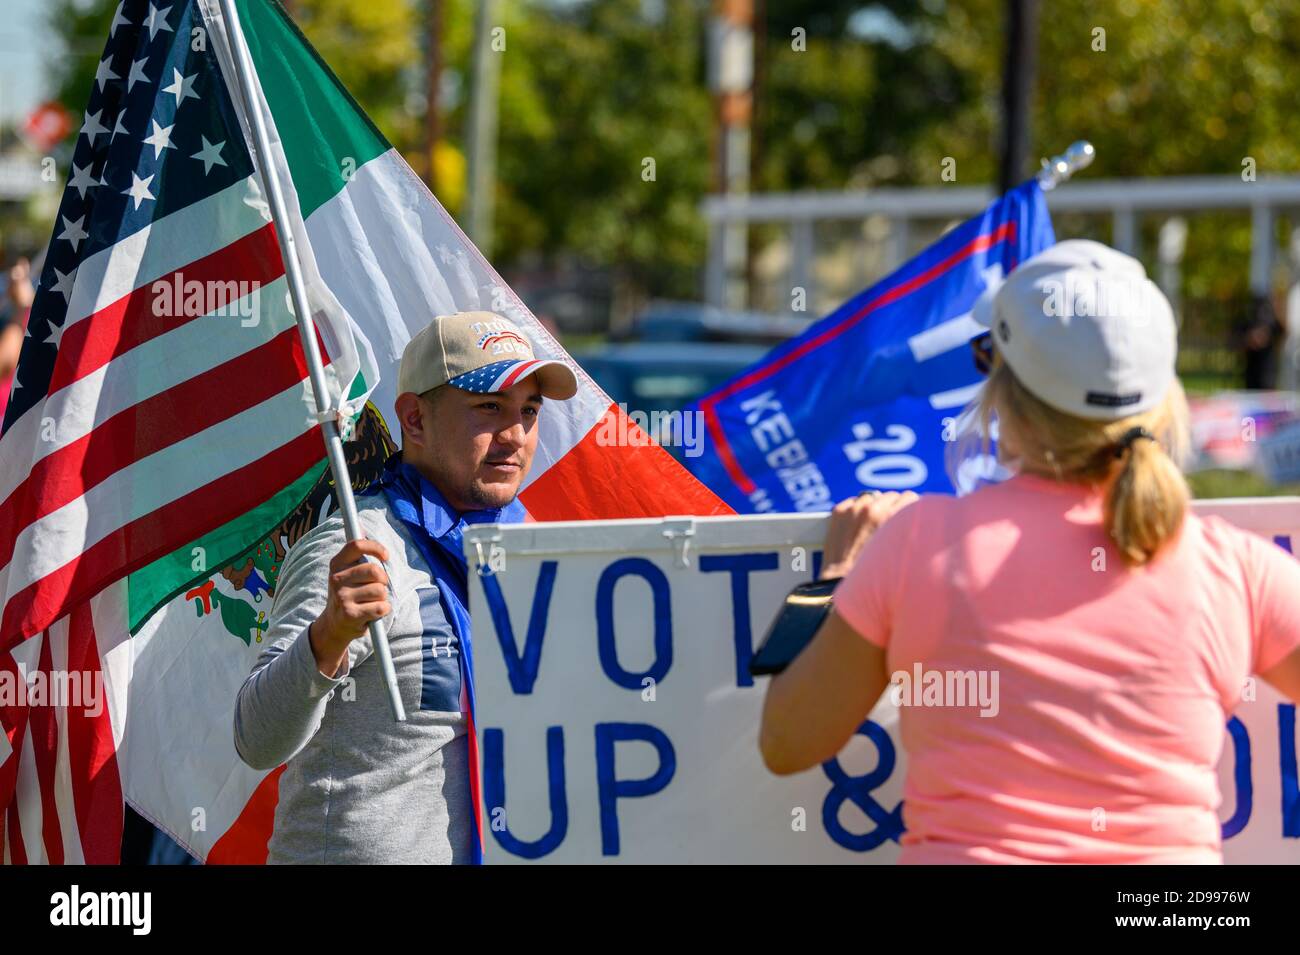 Houston, Texas, USA. 3rd Nov, 2020. A Donald Trump supporter confronts a volunteer holding anti-Trump signs outside polling station in Harris County, Houston, Texas, USA. Credit: Michelmond/Alamy Live News. Stock Photo